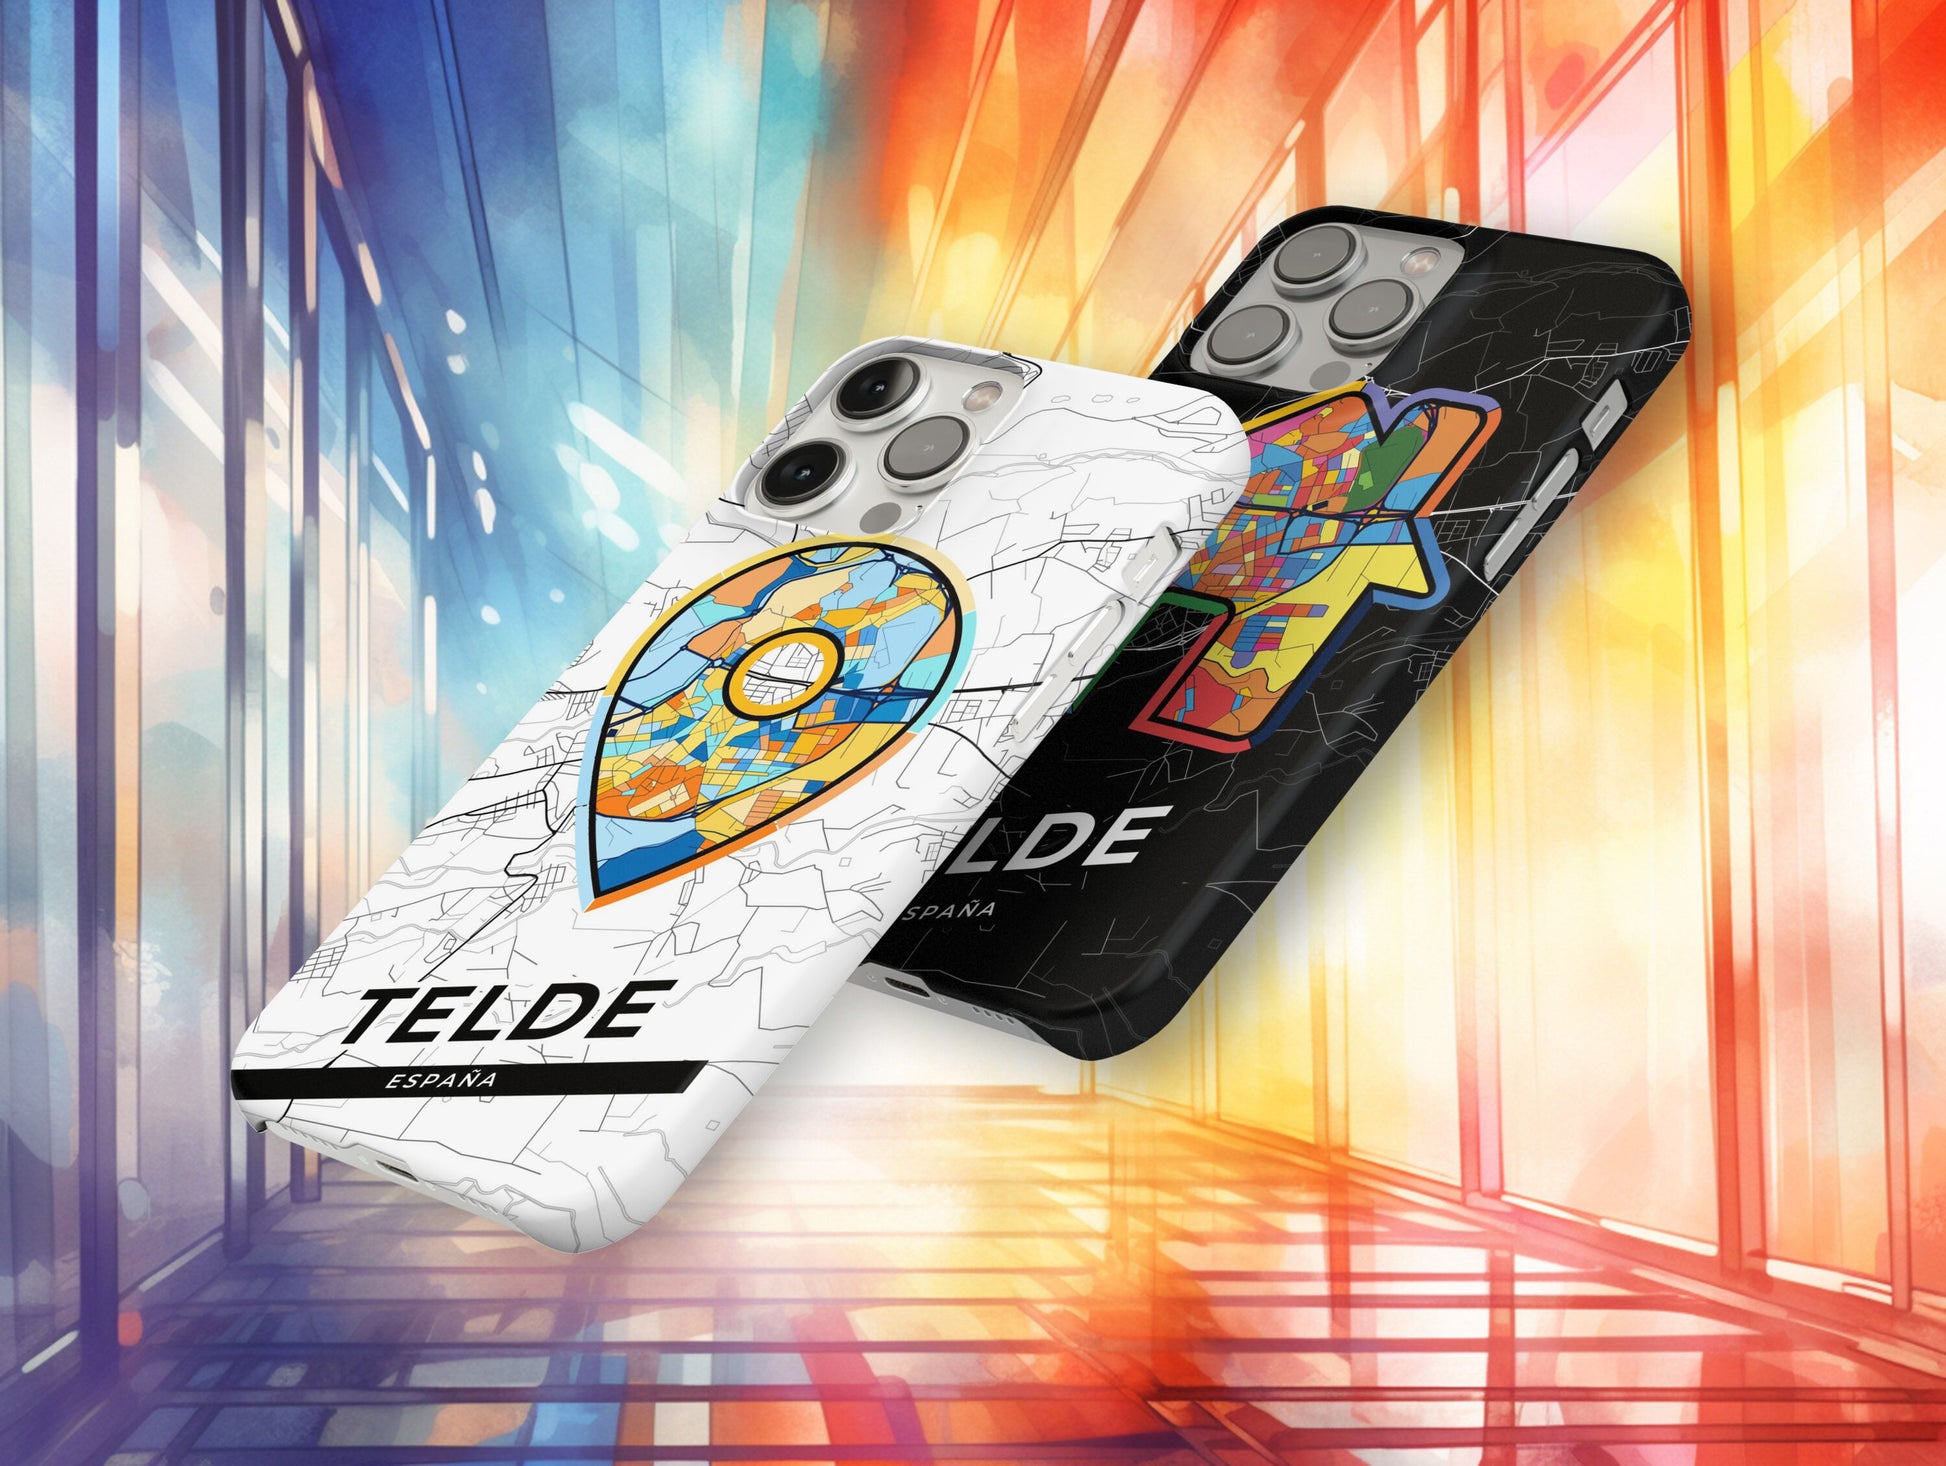 Telde Spain slim phone case with colorful icon